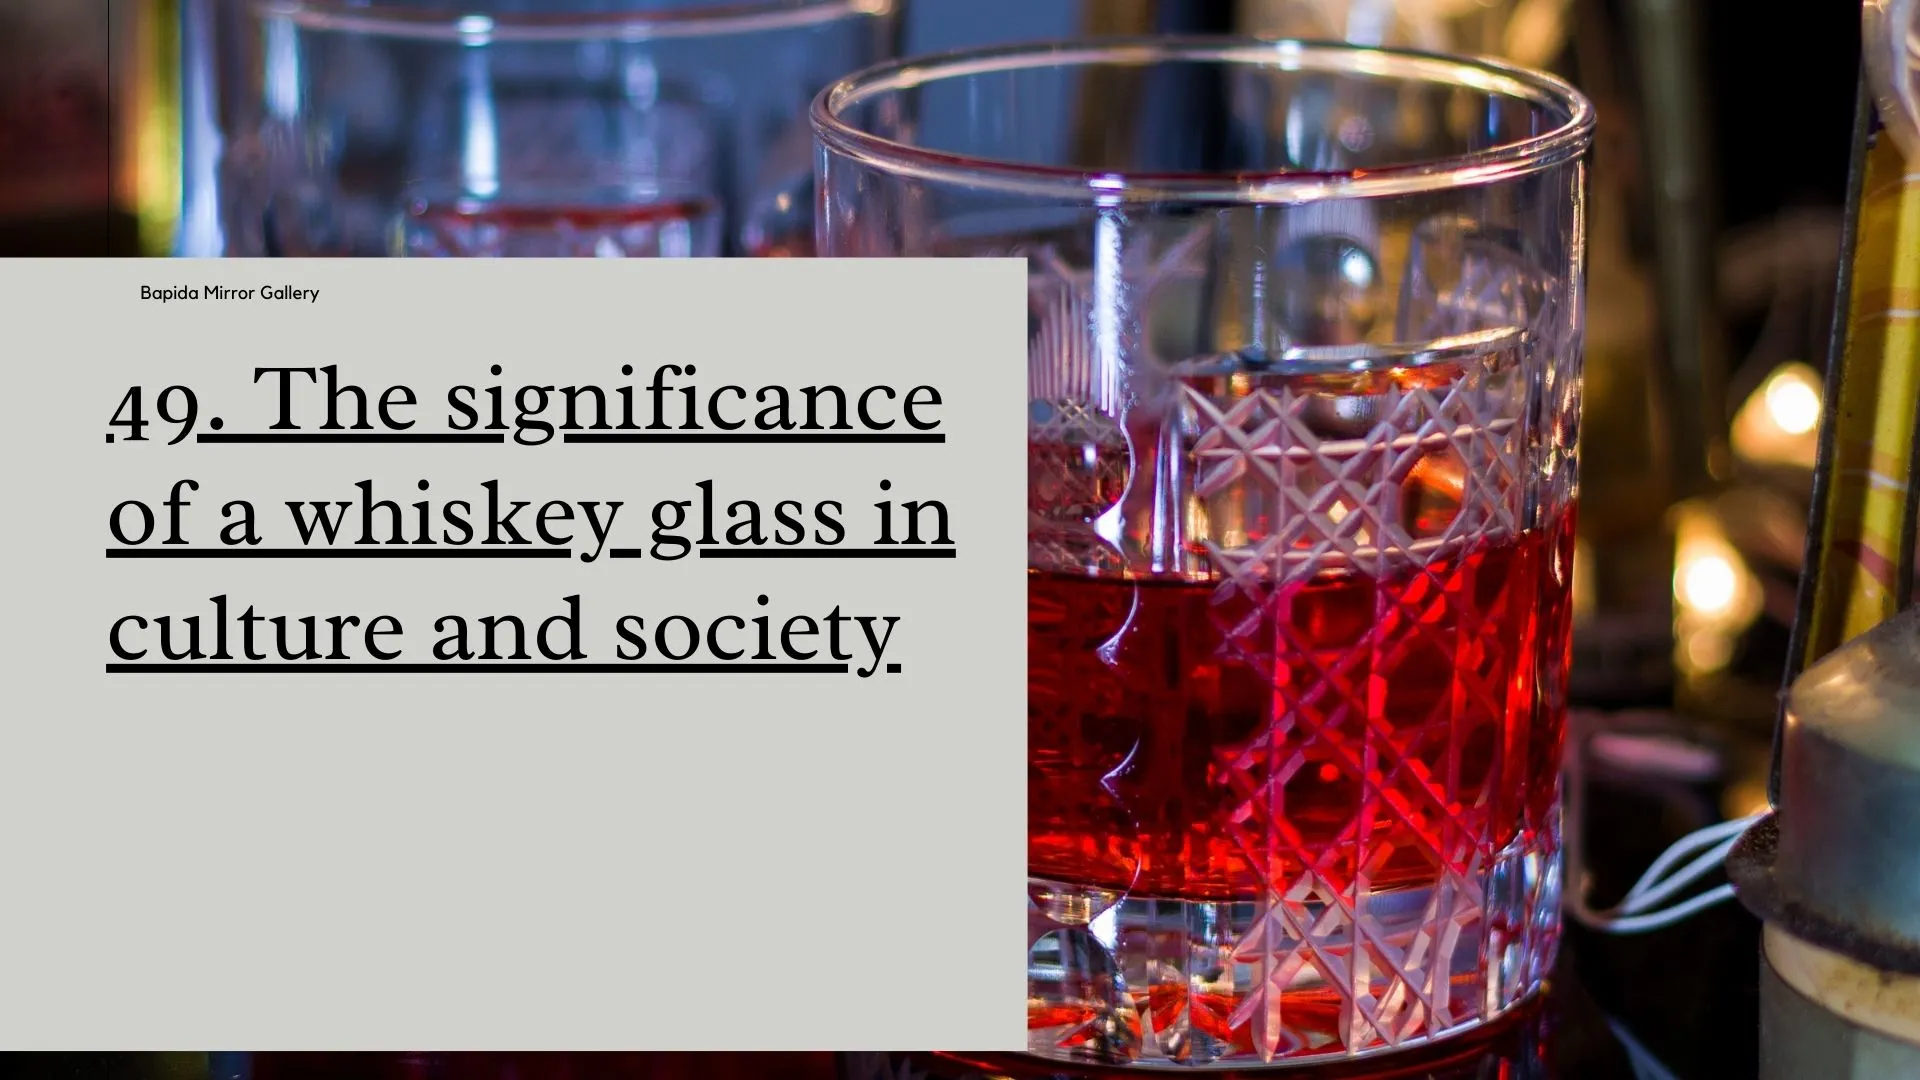 The Significance of a Whiskey Glass in Culture and Society